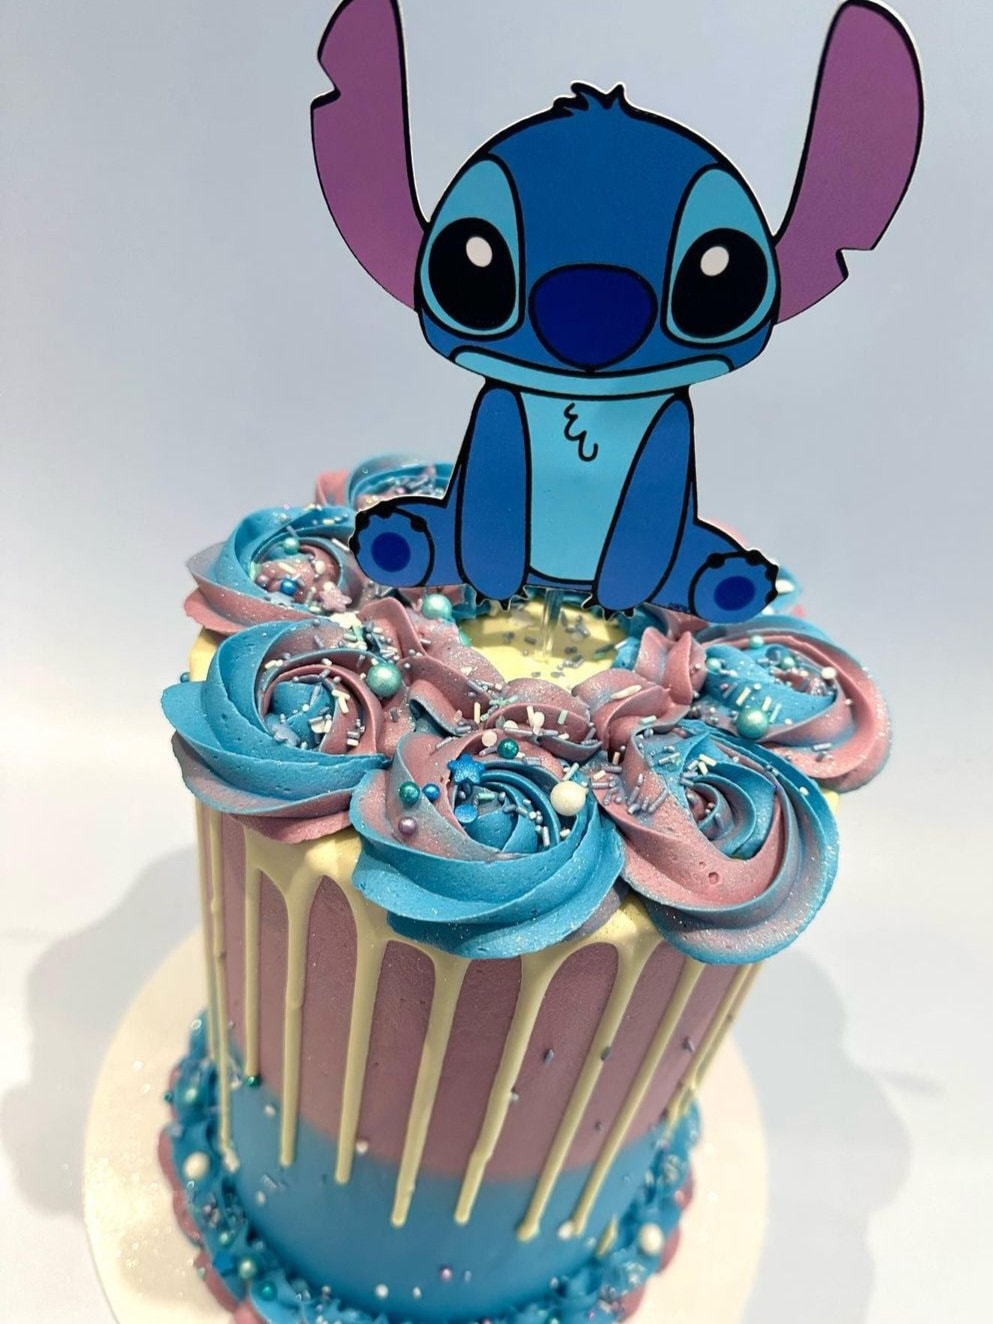 LiloStitch BB Edible Cake Toppers – Cakecery